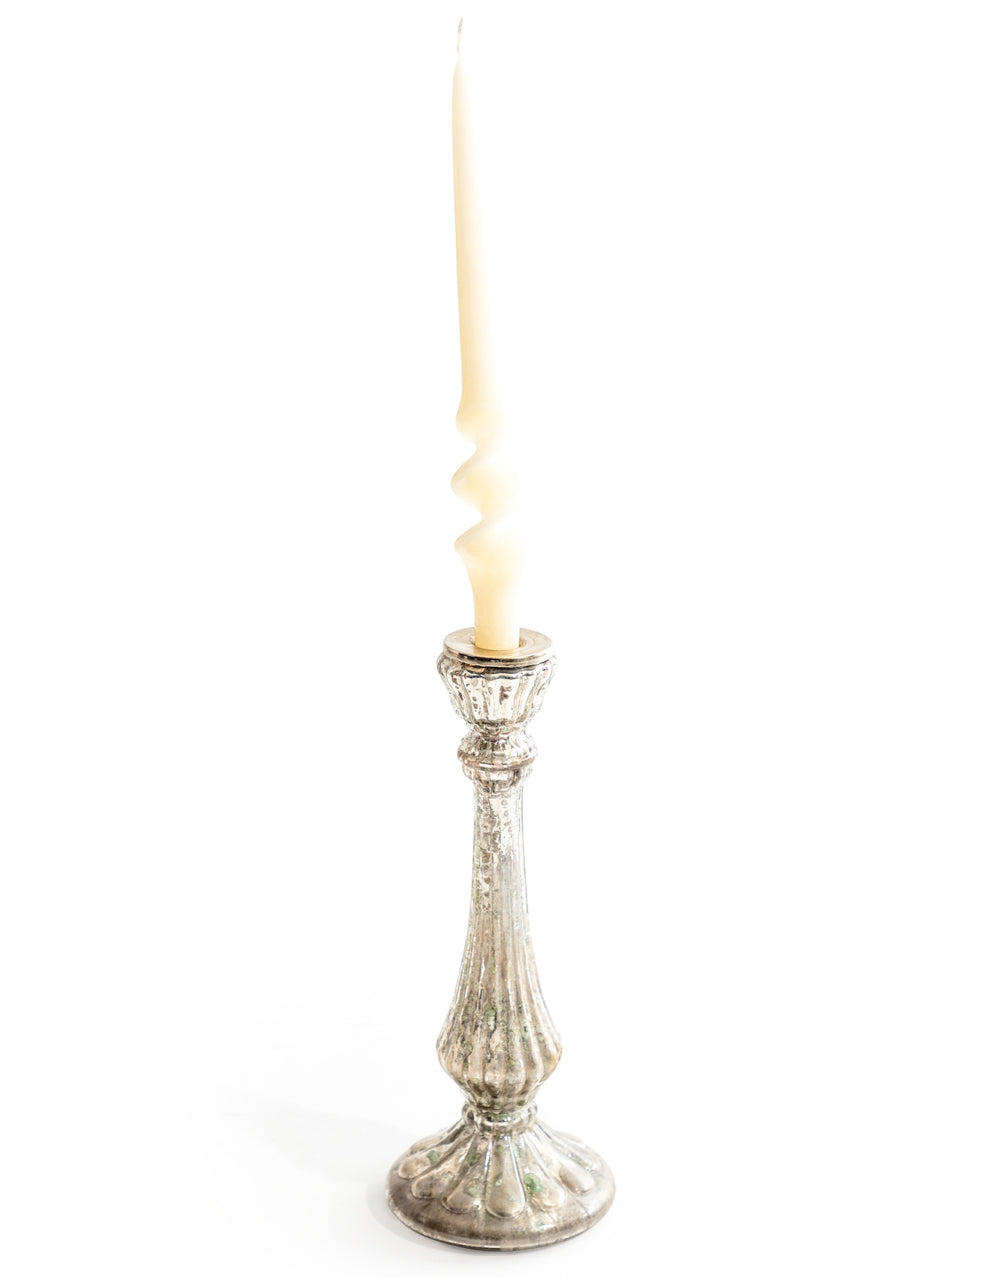 Medium Rustic Antique Silver Glass Candle Holder